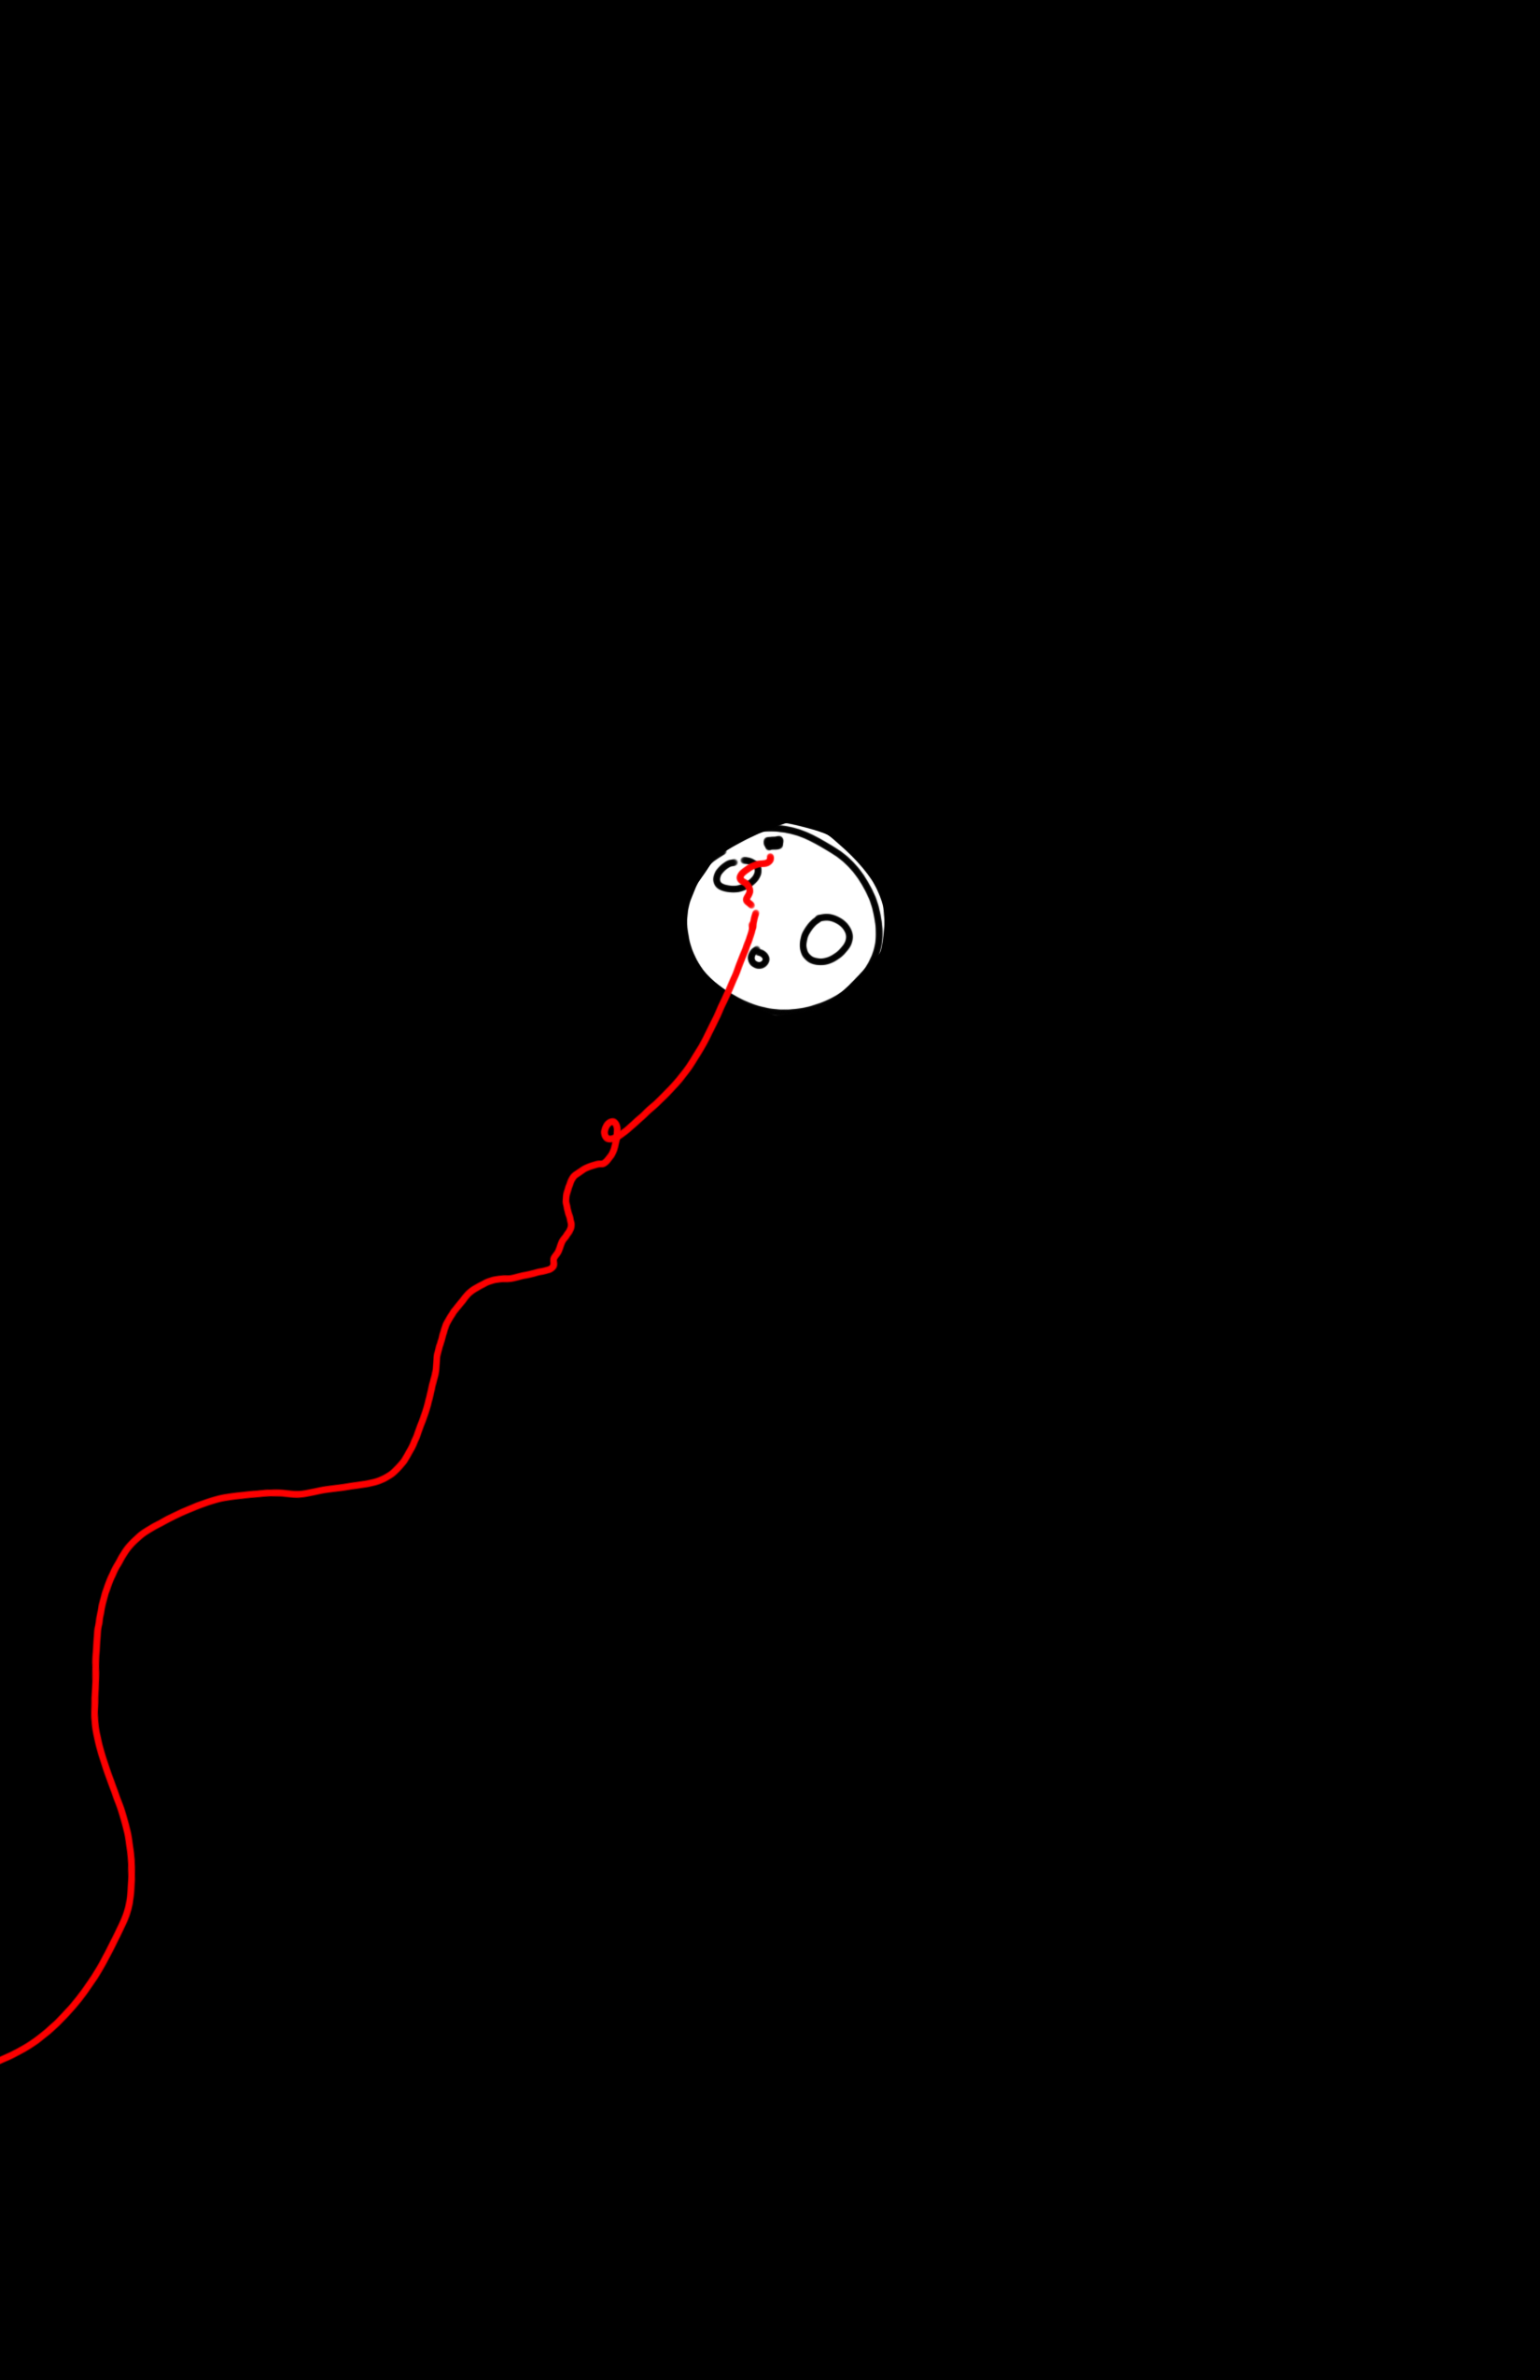 Black and white comic with simple digital drawings. The moon in space. It is small in the middle of a black page. It's a circle with 3 craters interspersed on it's surface, with a black speck near the top. A red string trails from the left side of the page in the void of space and connects on the surface of the planet.